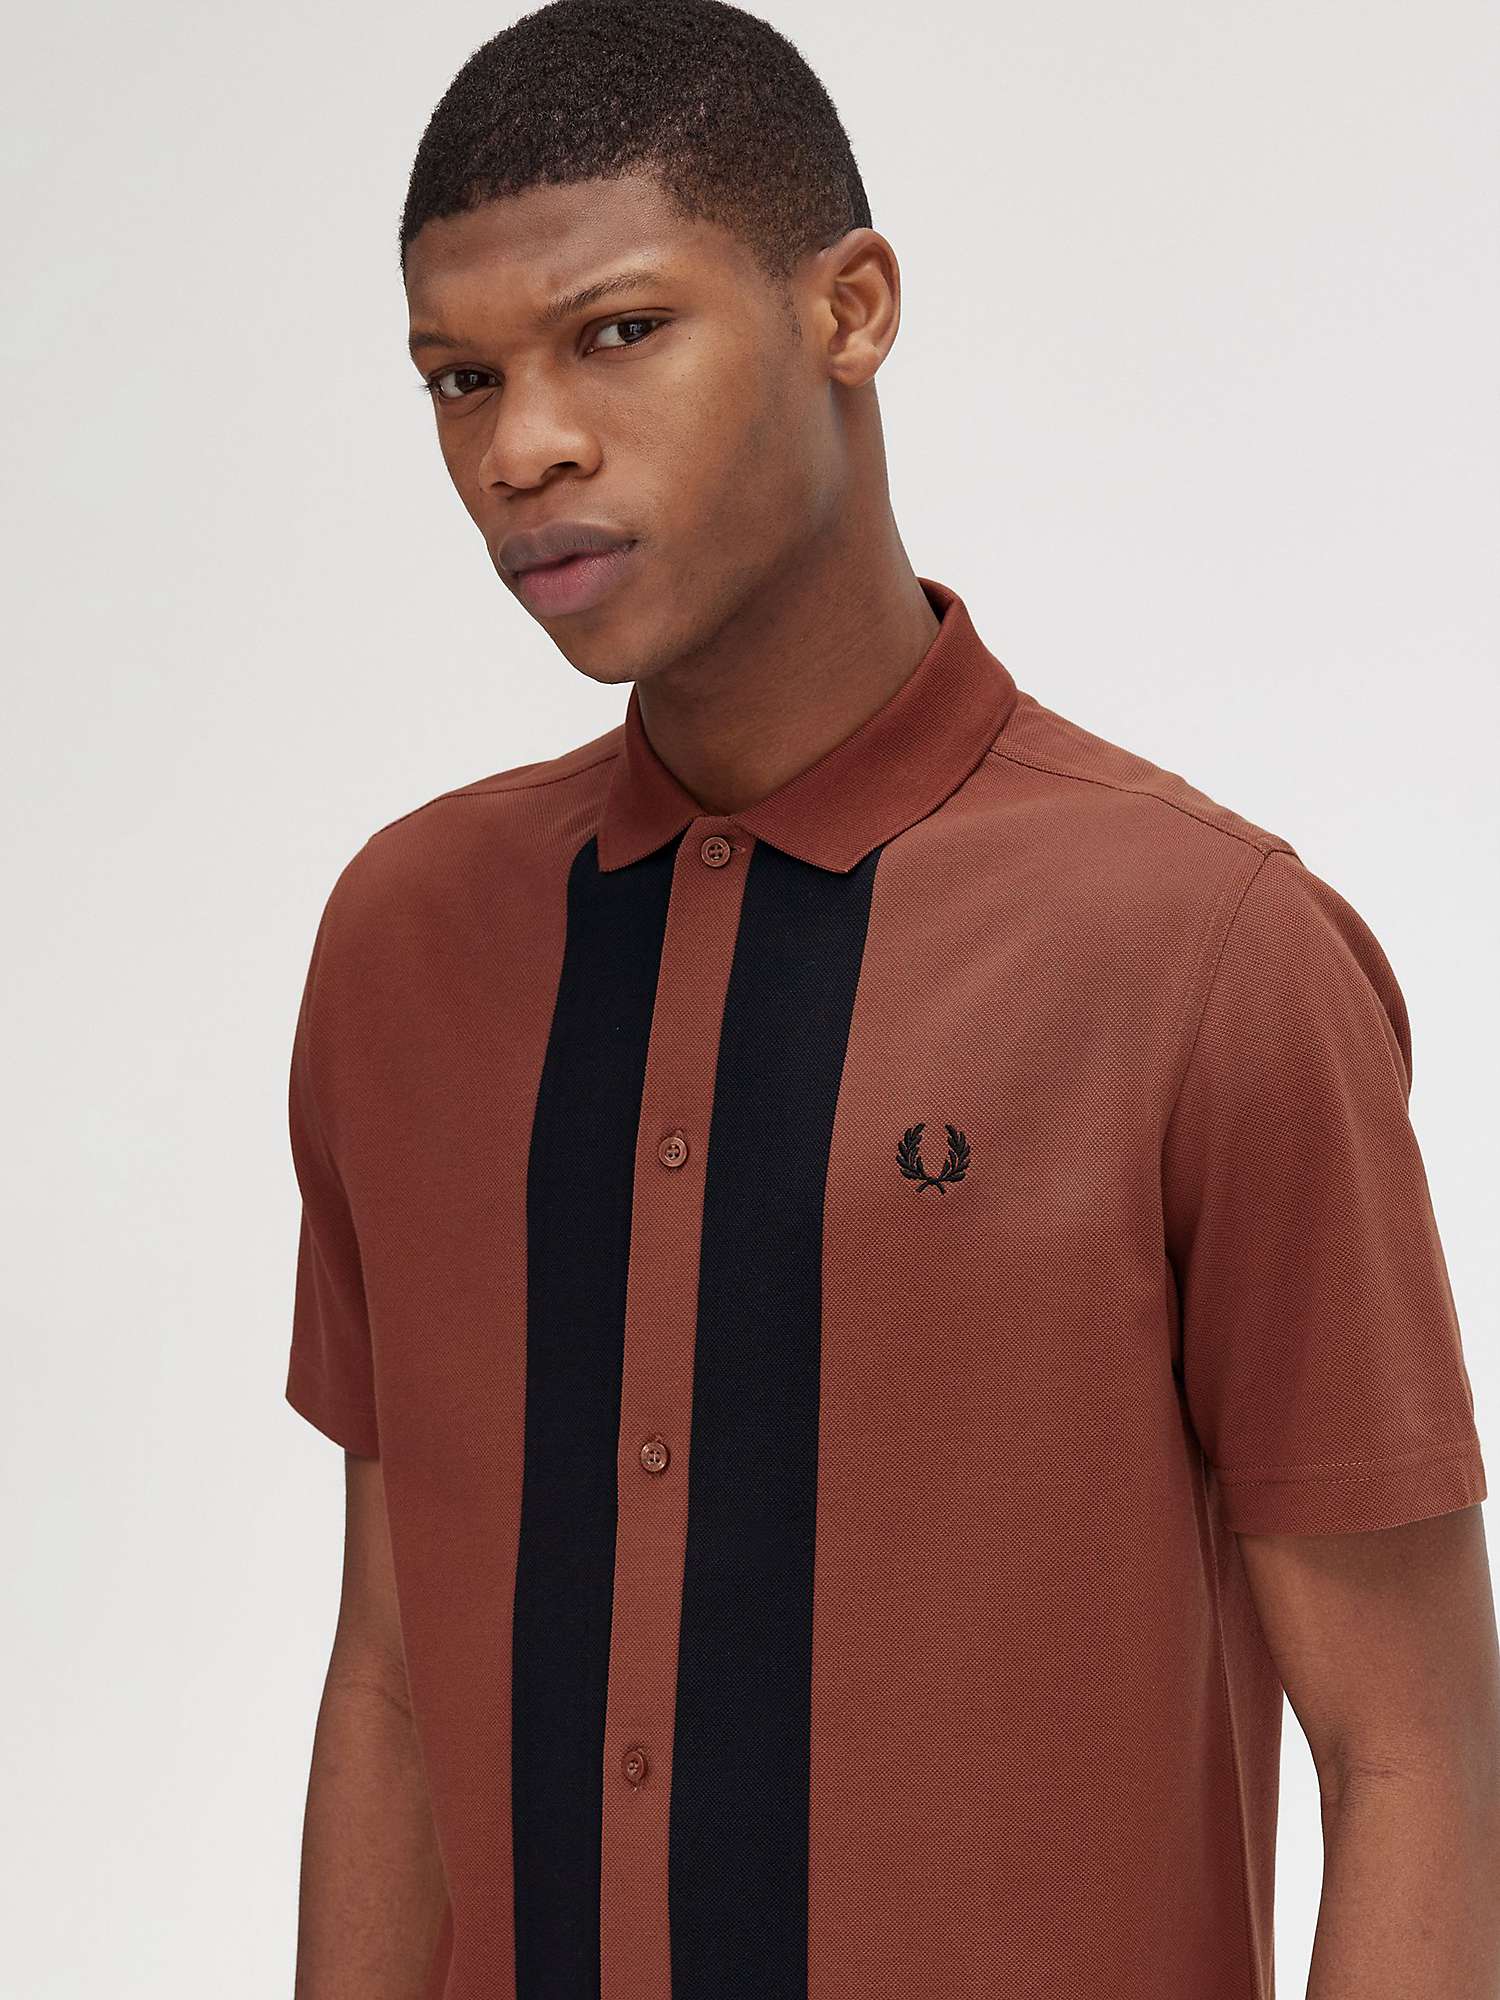 Buy Fred Perry Short Sleeve Panel Polo Shirt, Brown/Black Online at johnlewis.com